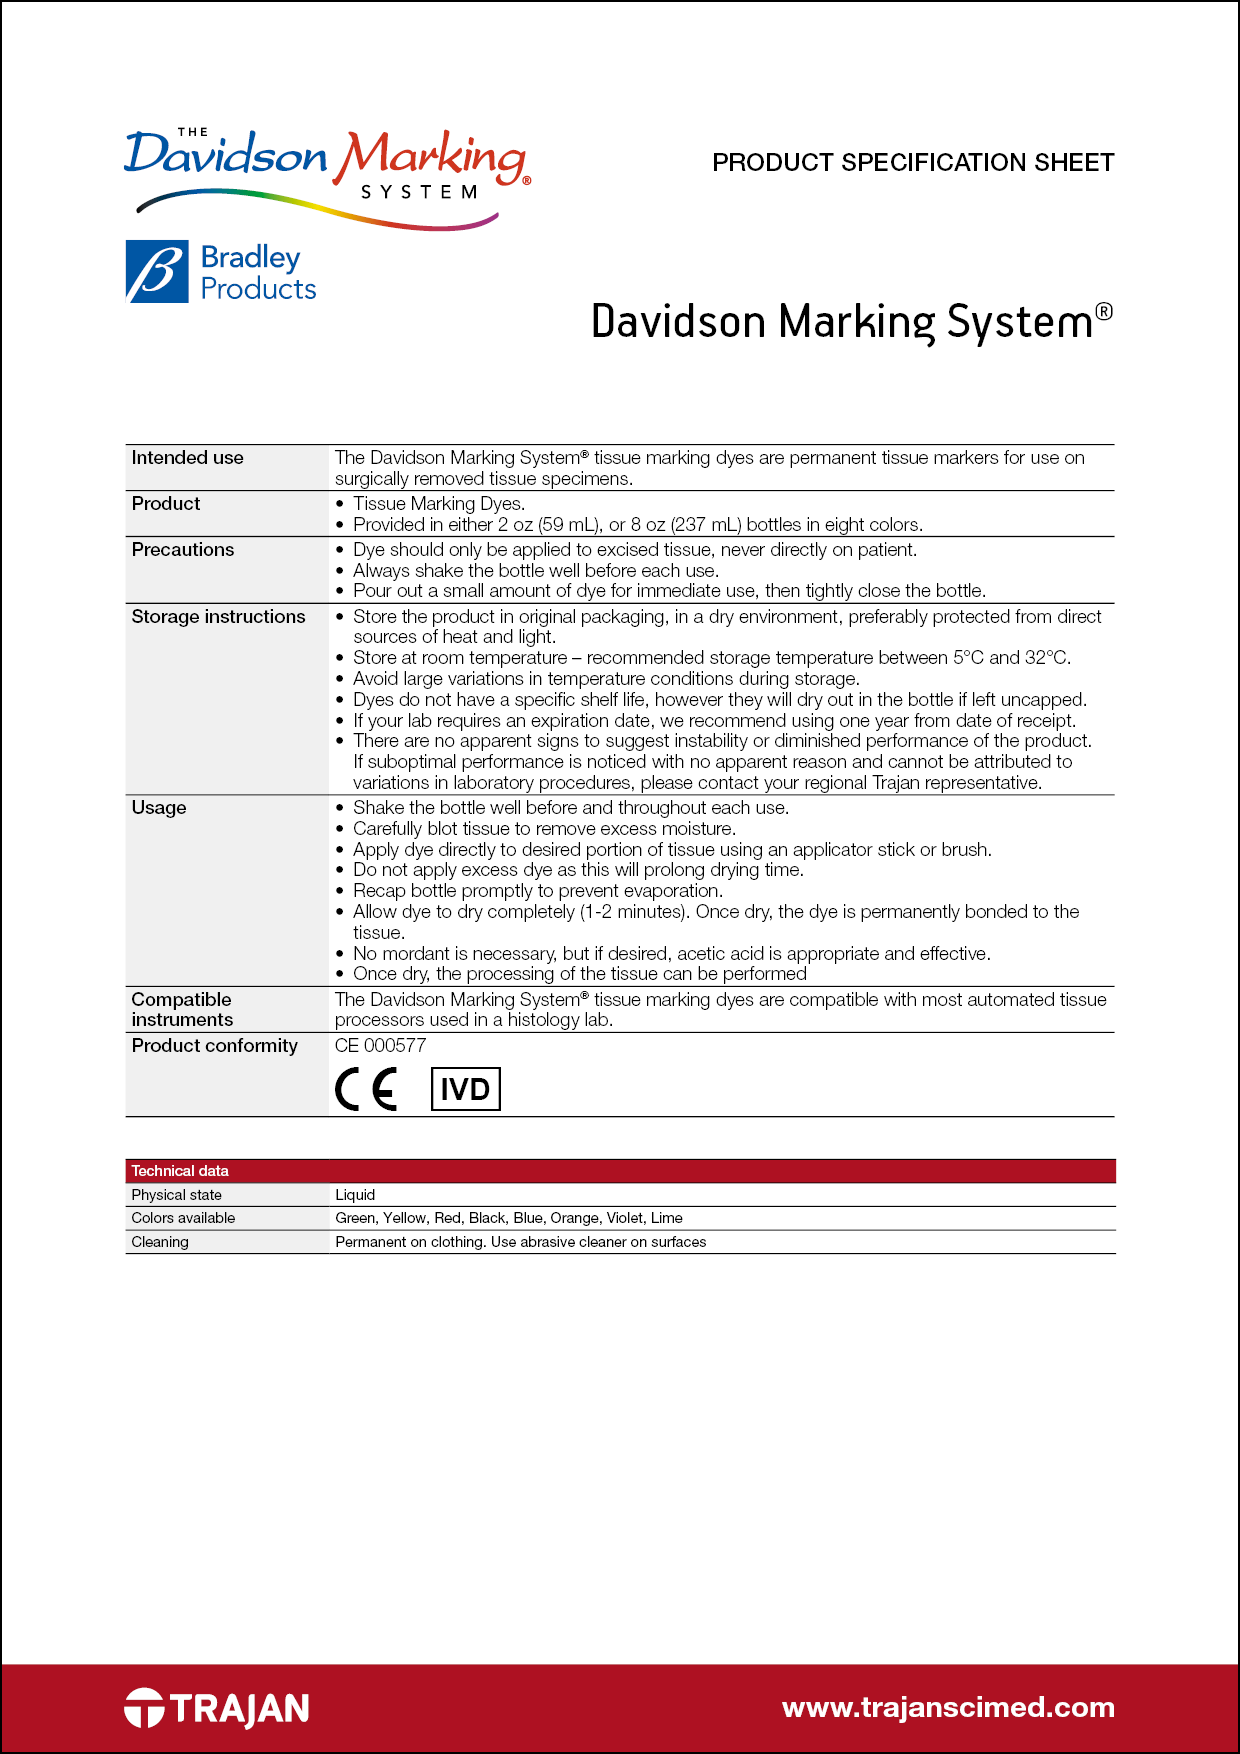 Product Specification Sheet - Davidson Marking System